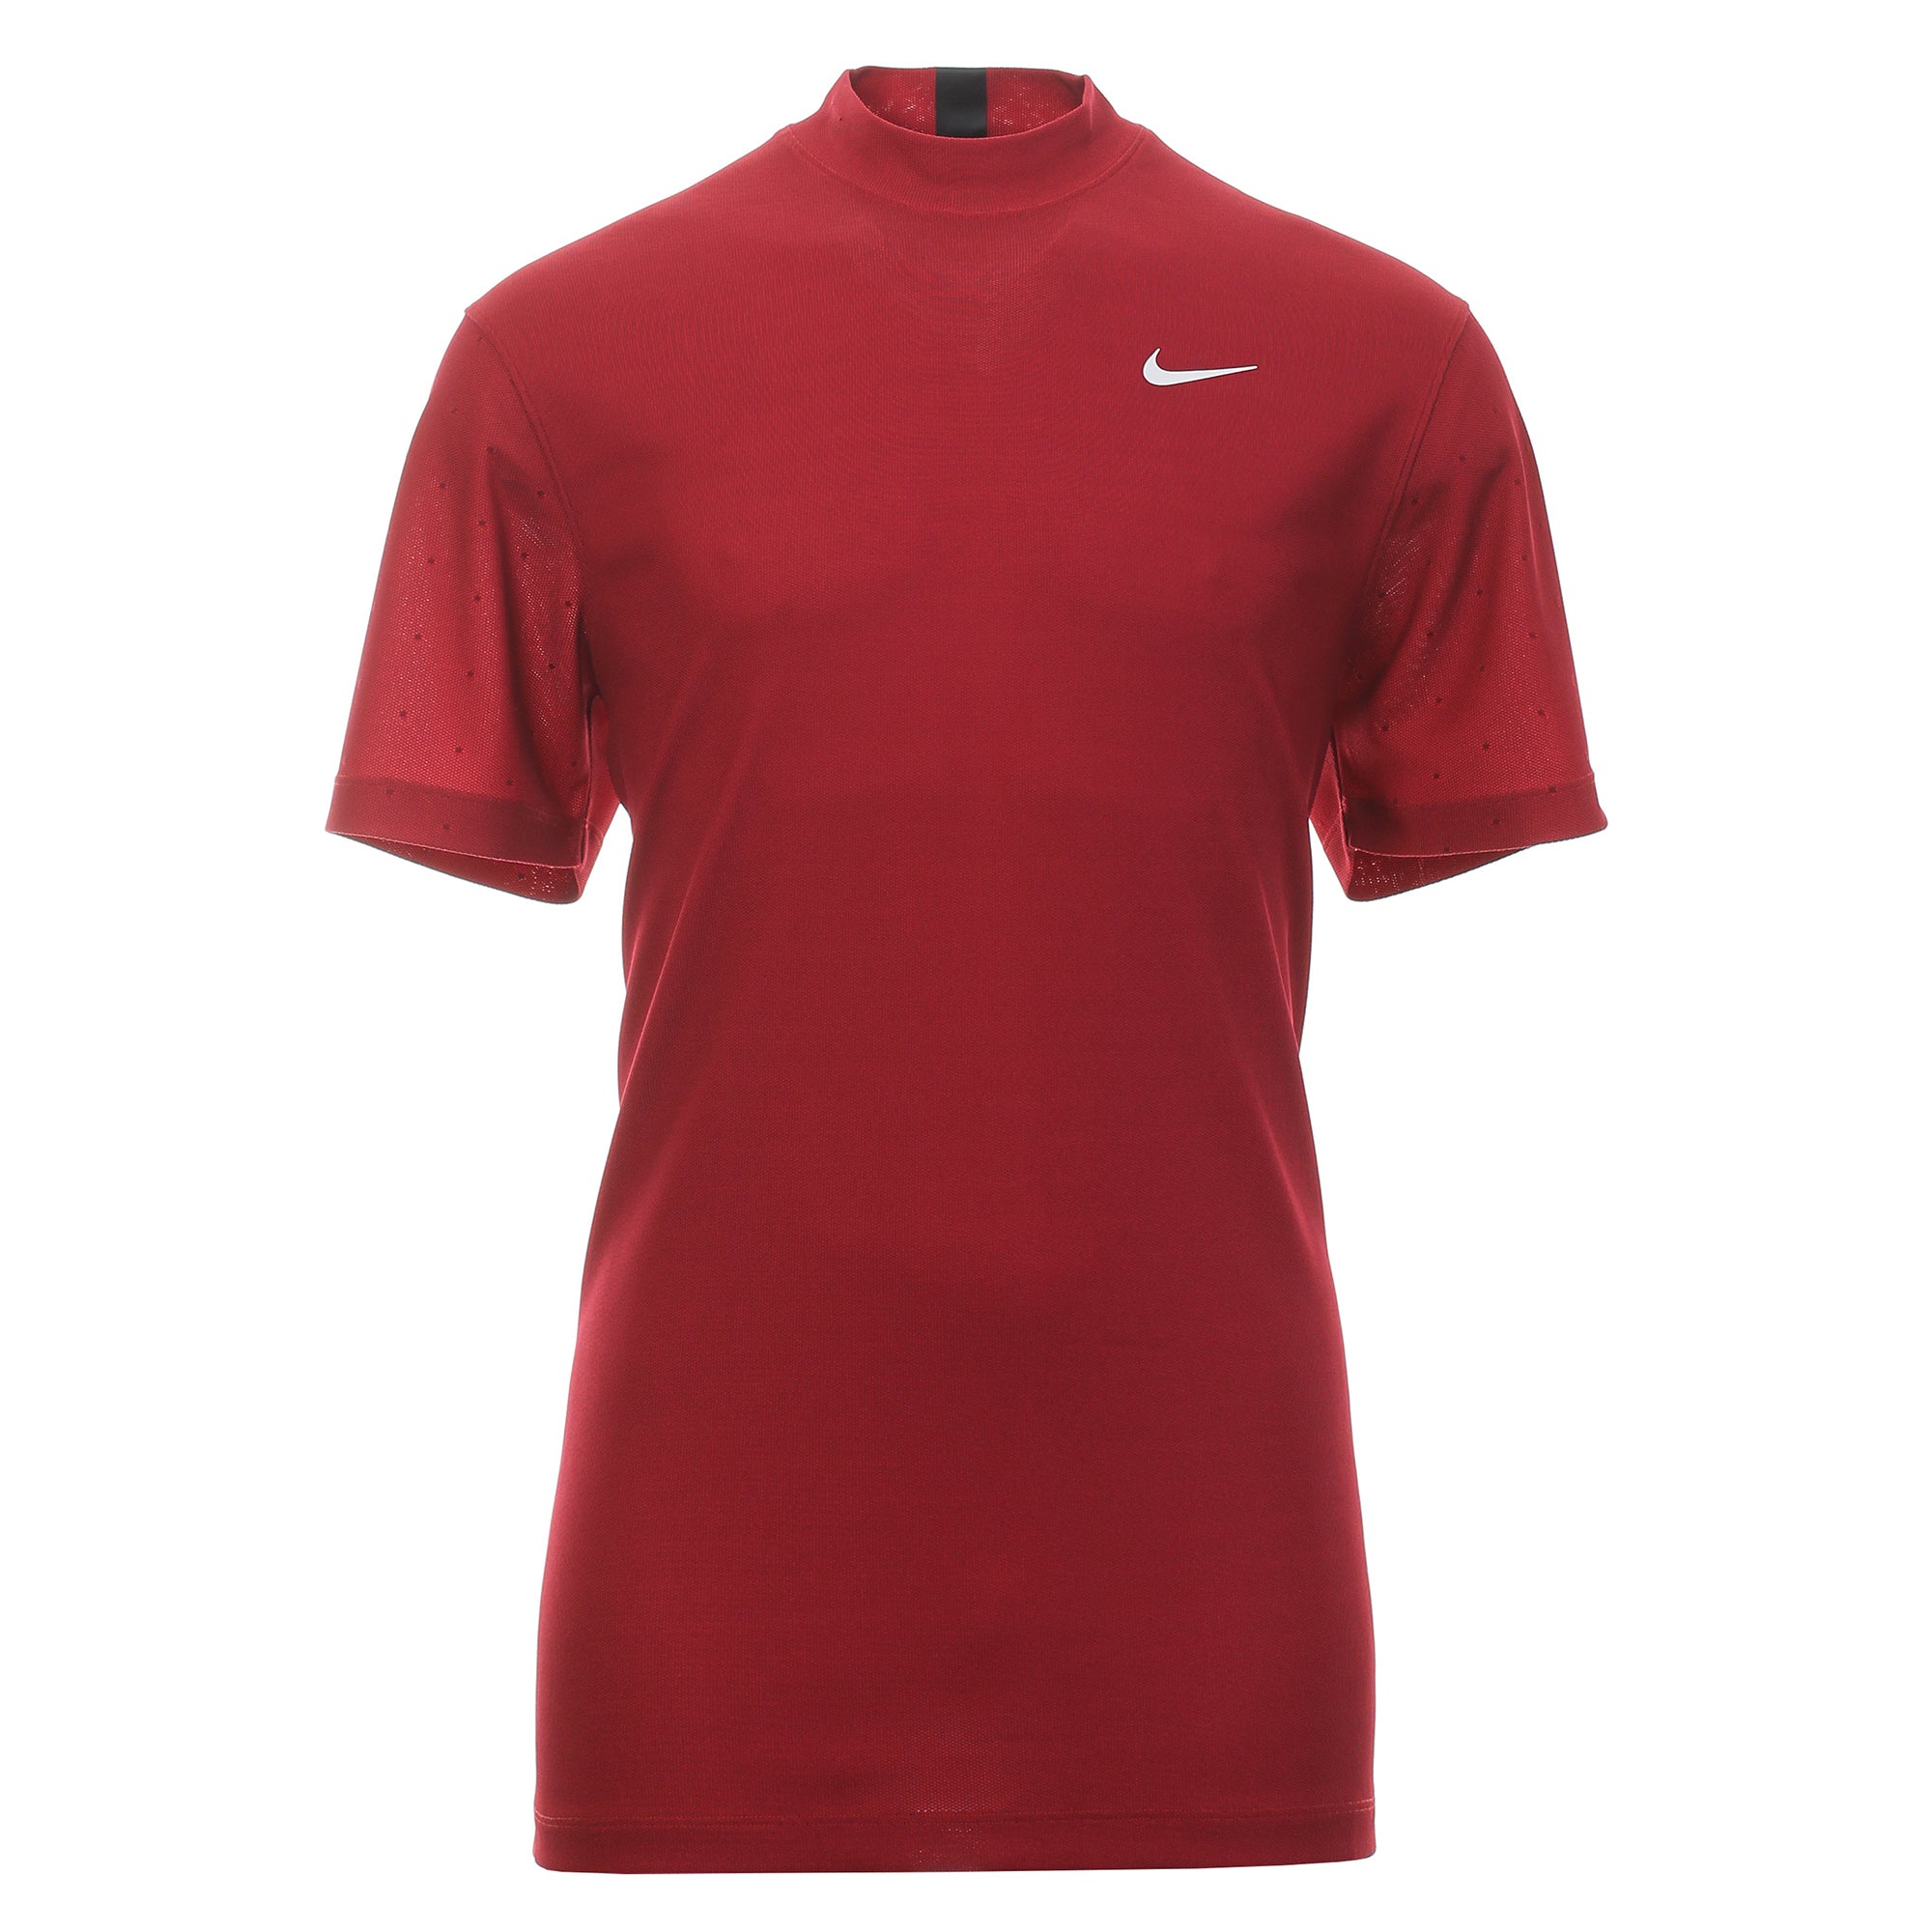 Download Nike Golf TW Dry Mock Shirt CT6078 Gym Red 687 | Function18